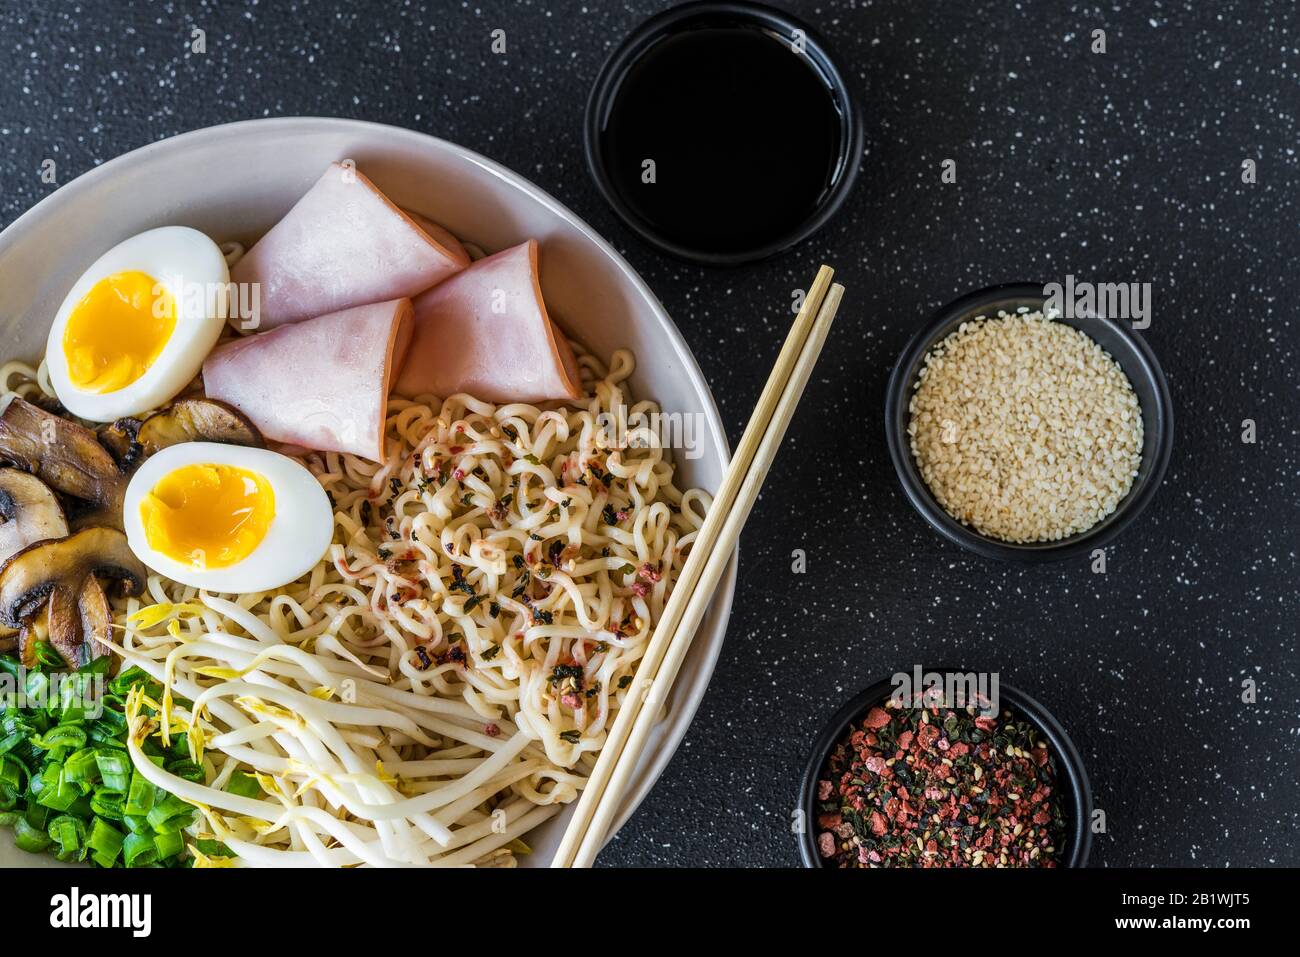 A bowl of asian food ramen noodles soup against black stone background. Stock Photo